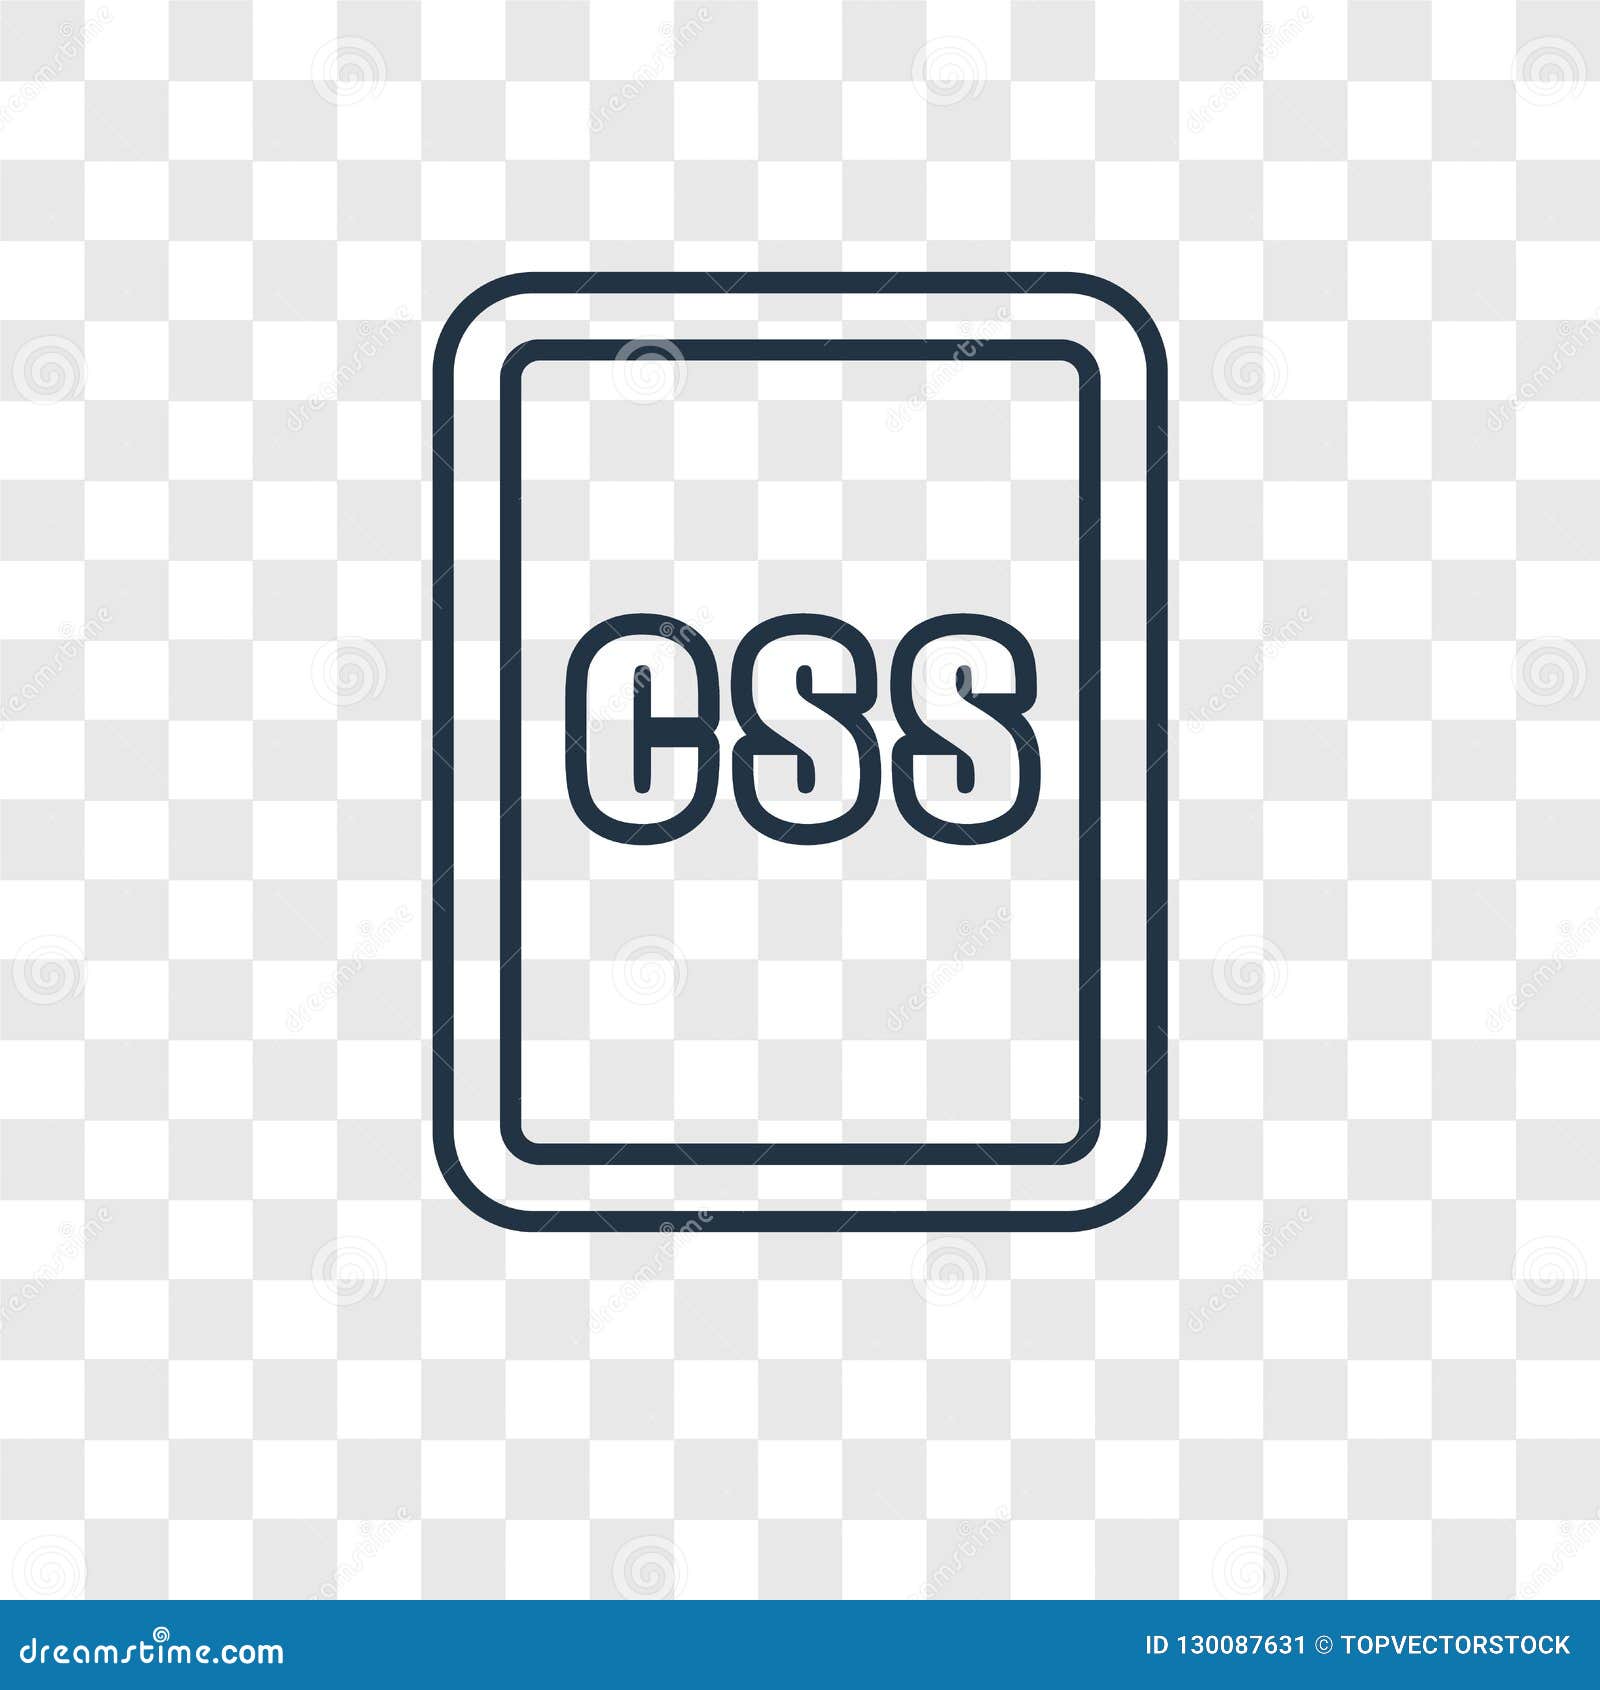 Learn How to make background image transparent css in CSS